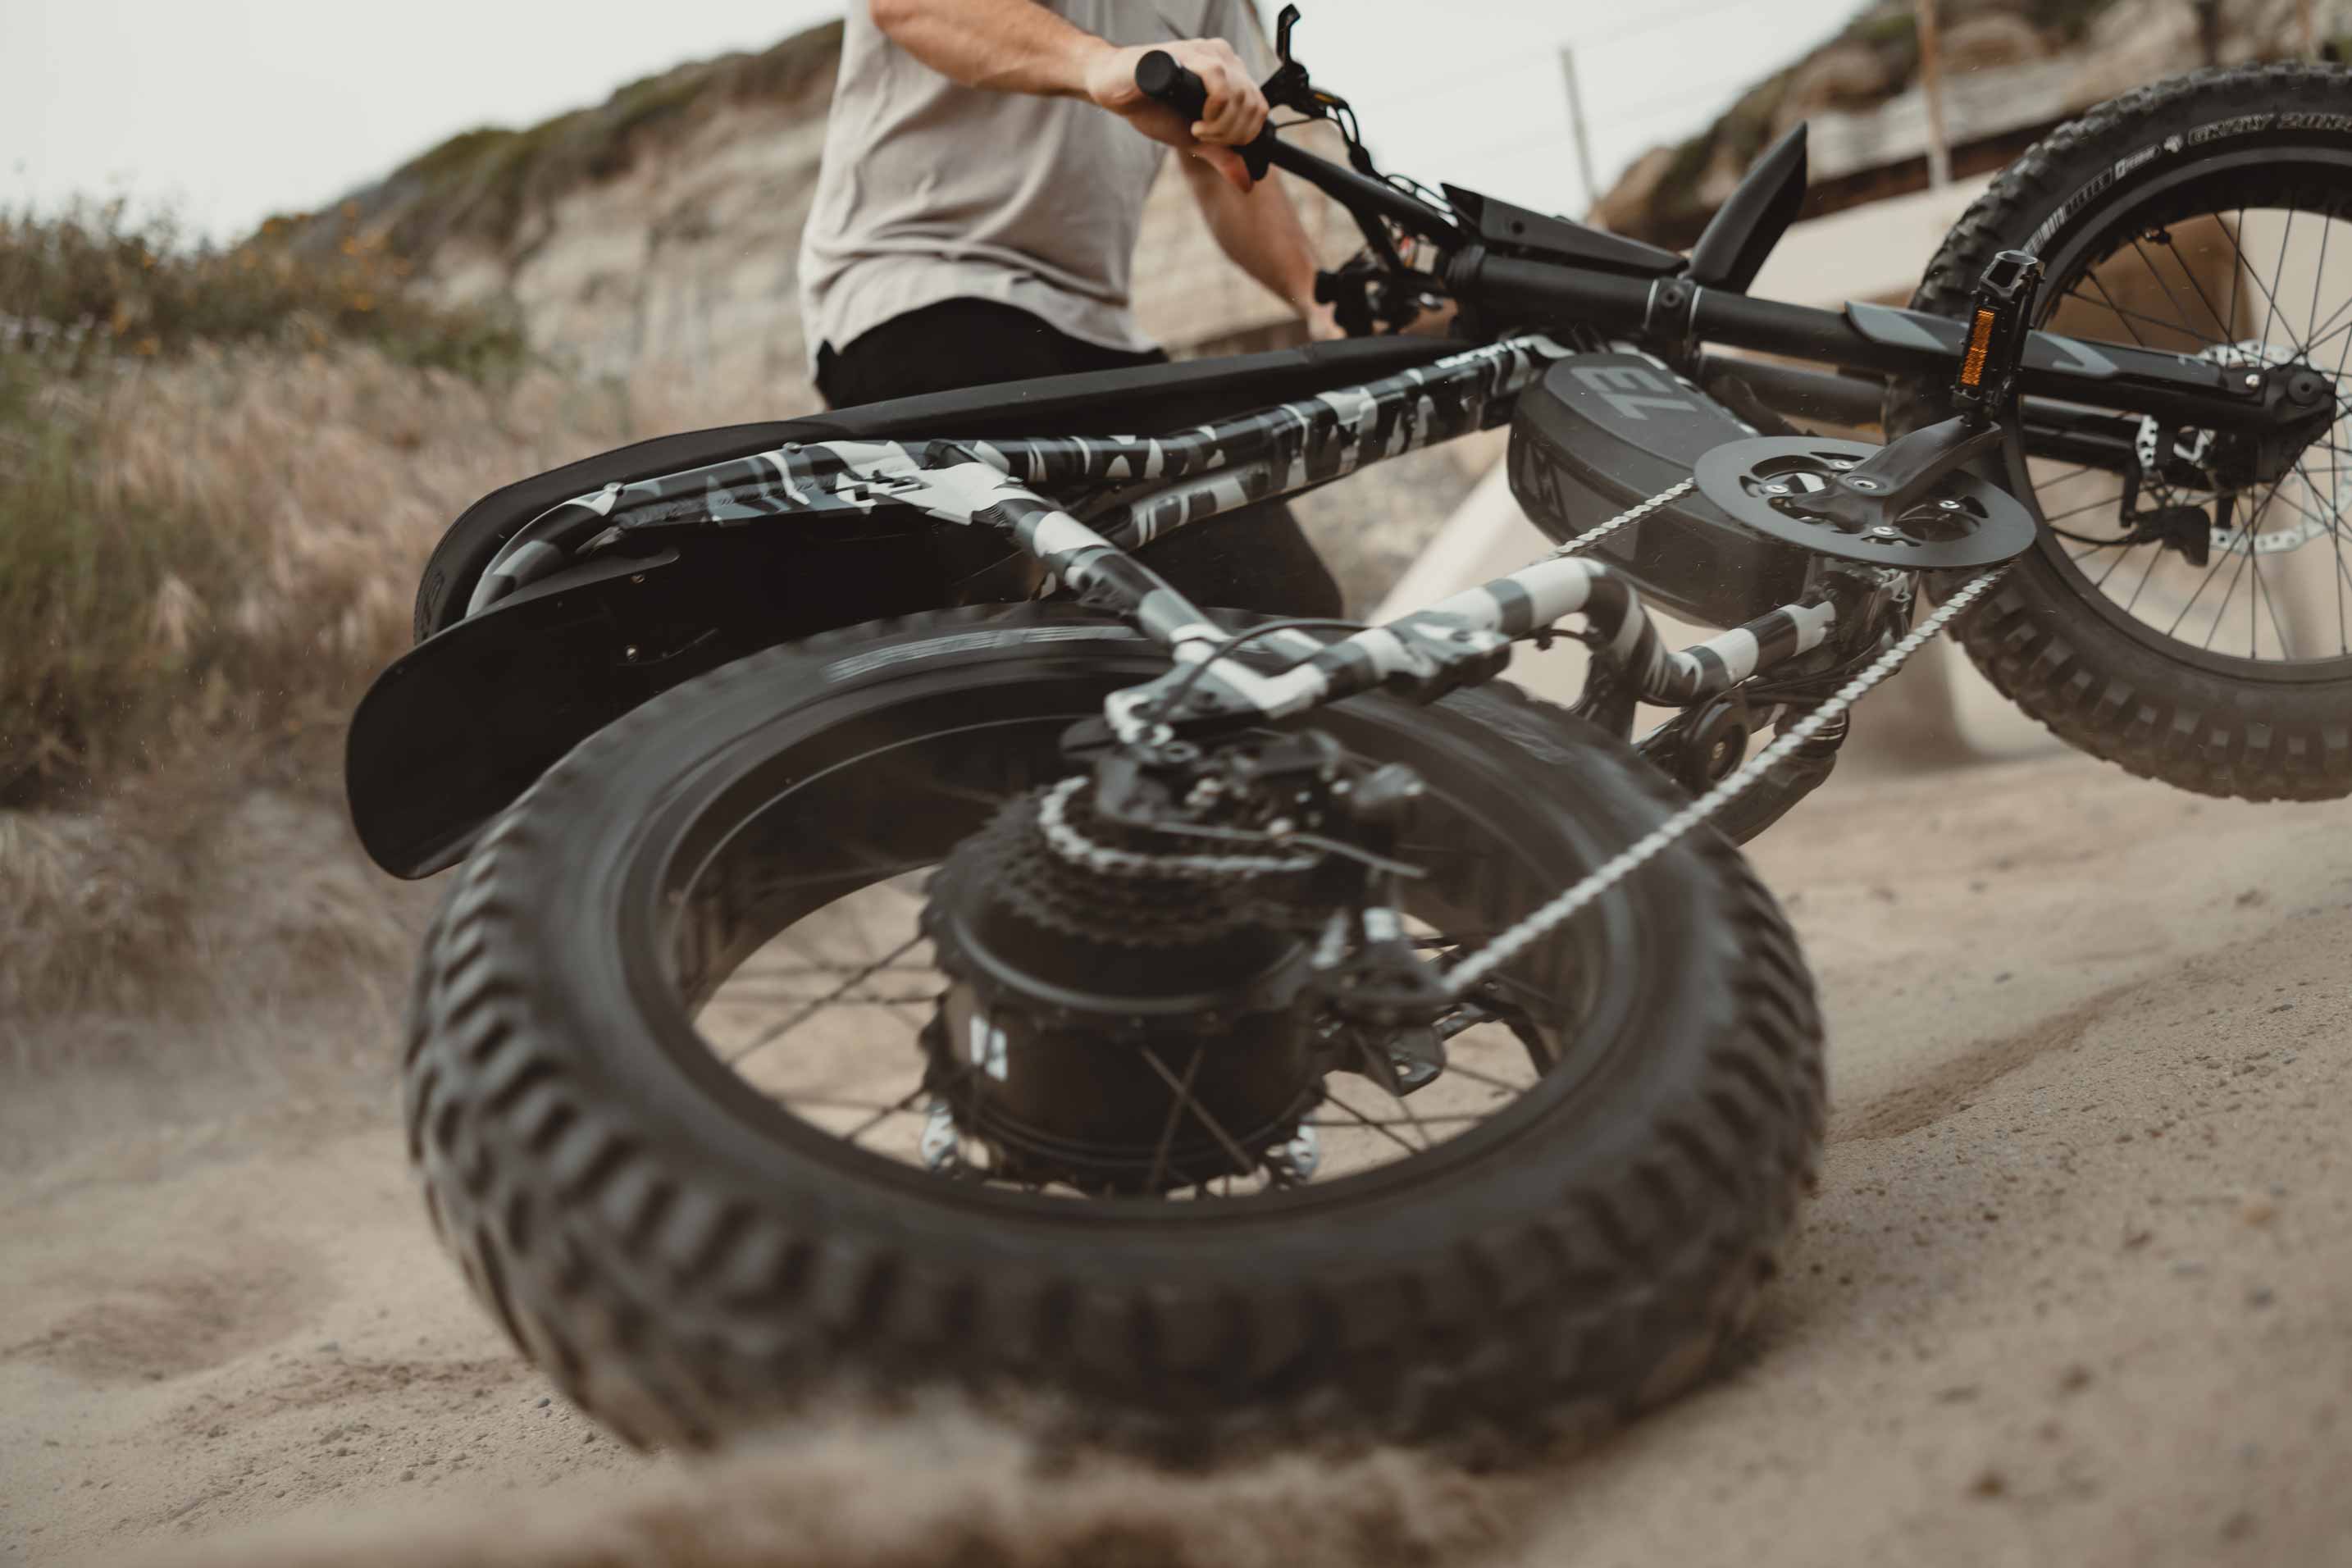 The SUPER73 Adventure ebike in Snowshadow taking hard turns in the dirt